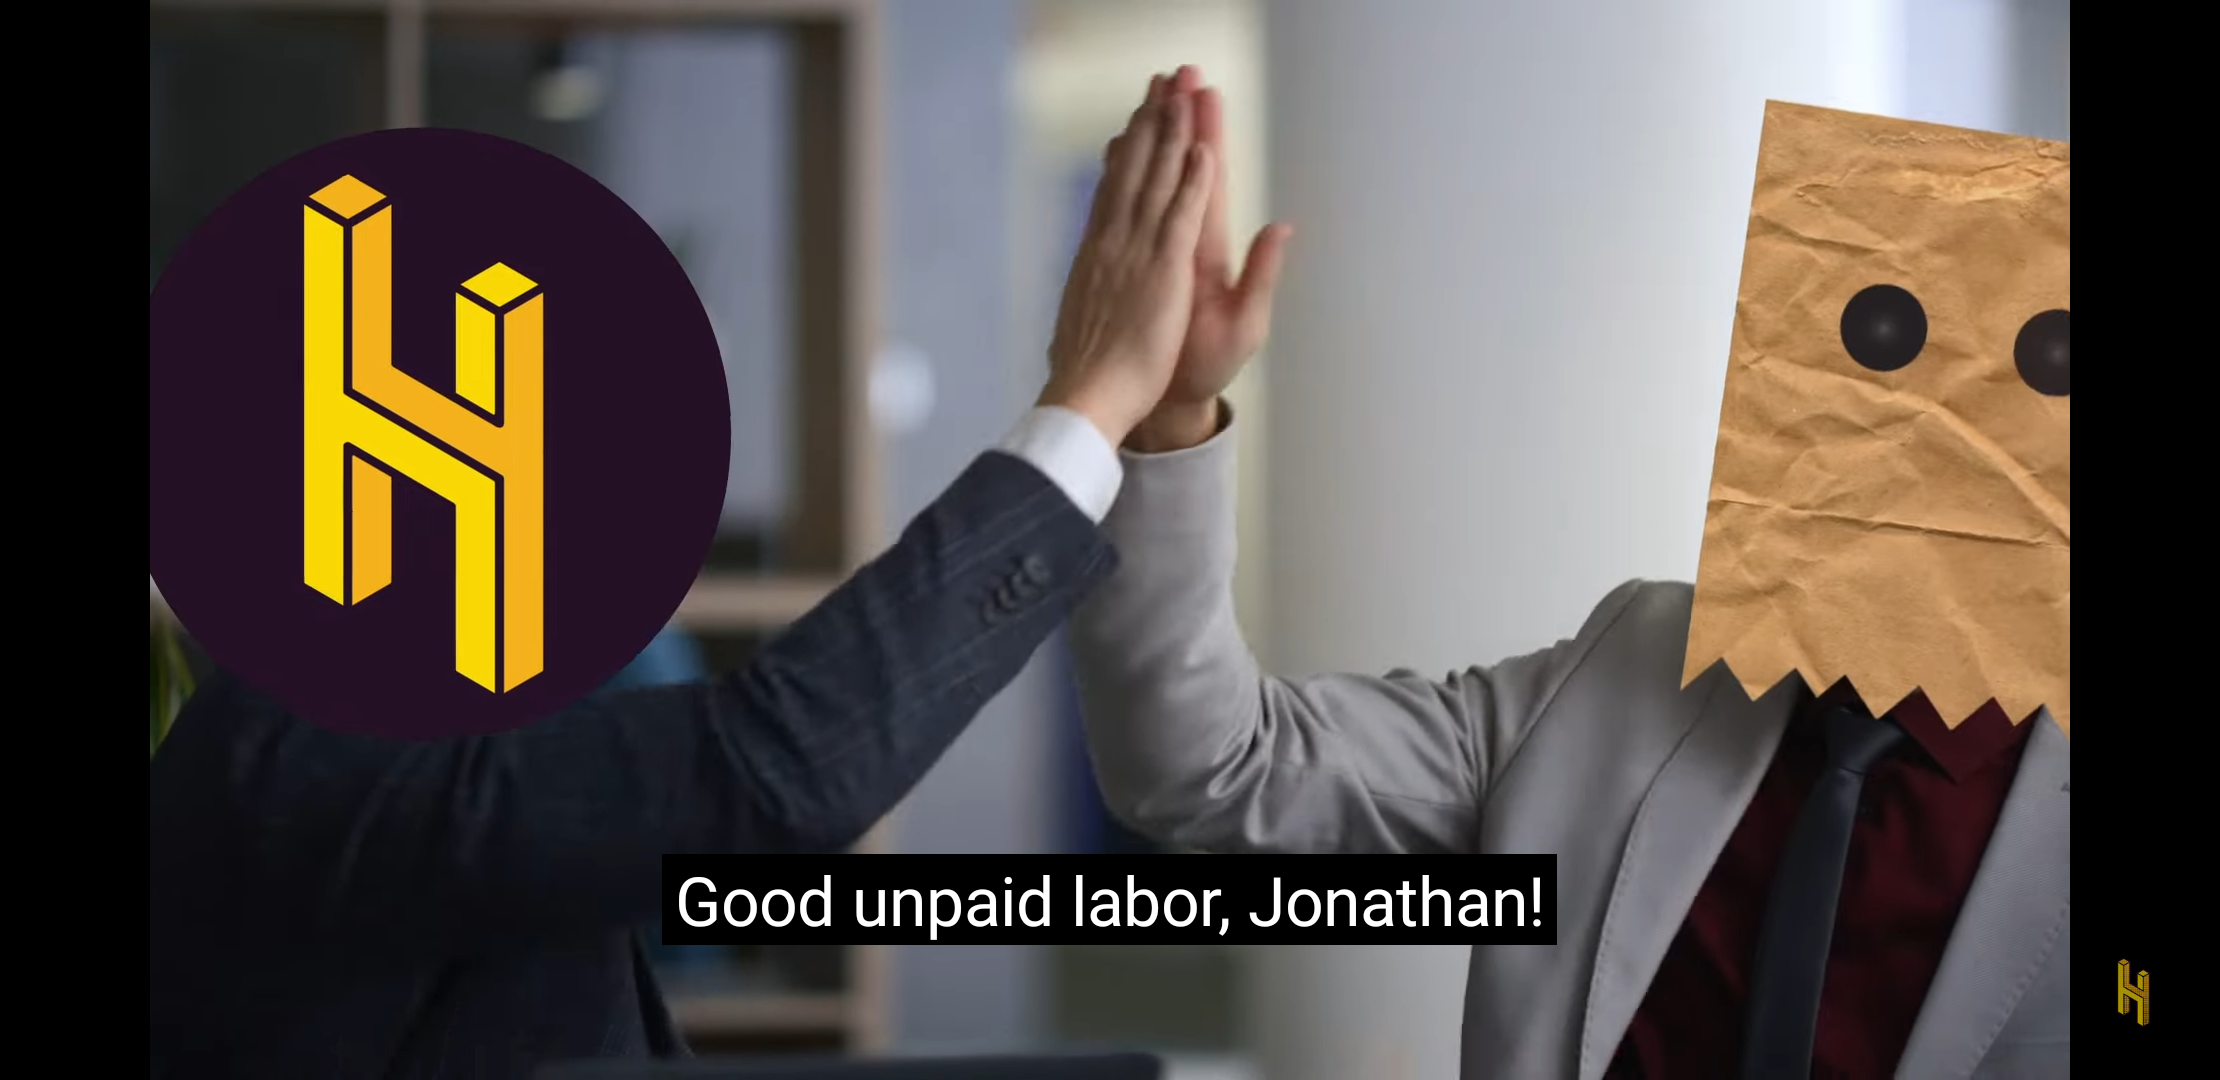 Screenshot of Half as Interesting's video: two characters high-fiving, one whose head has been replaced by their logo and the other with a bag over their head, with the subtitle "Good unpaid labour, Jonathan!".